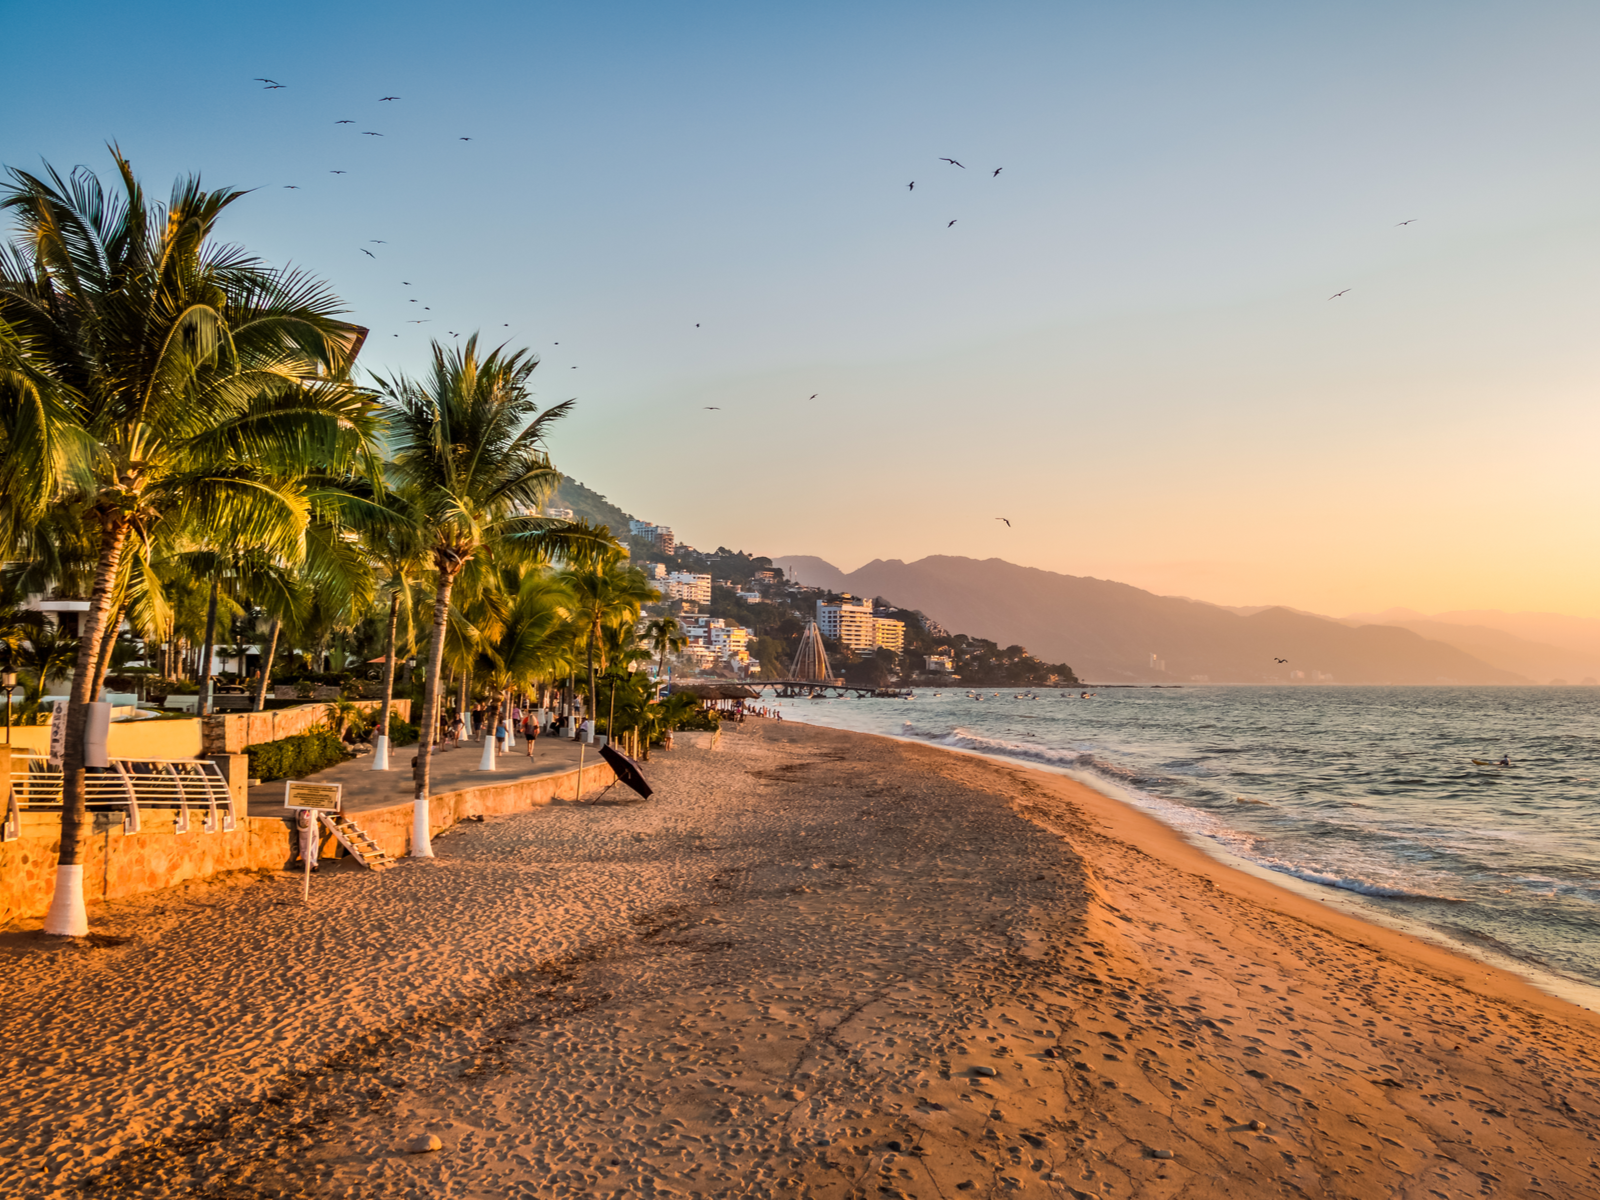 For a piece on Is Puerto Vallarta Safe, the Palm trees and the beach by the ocean pictured